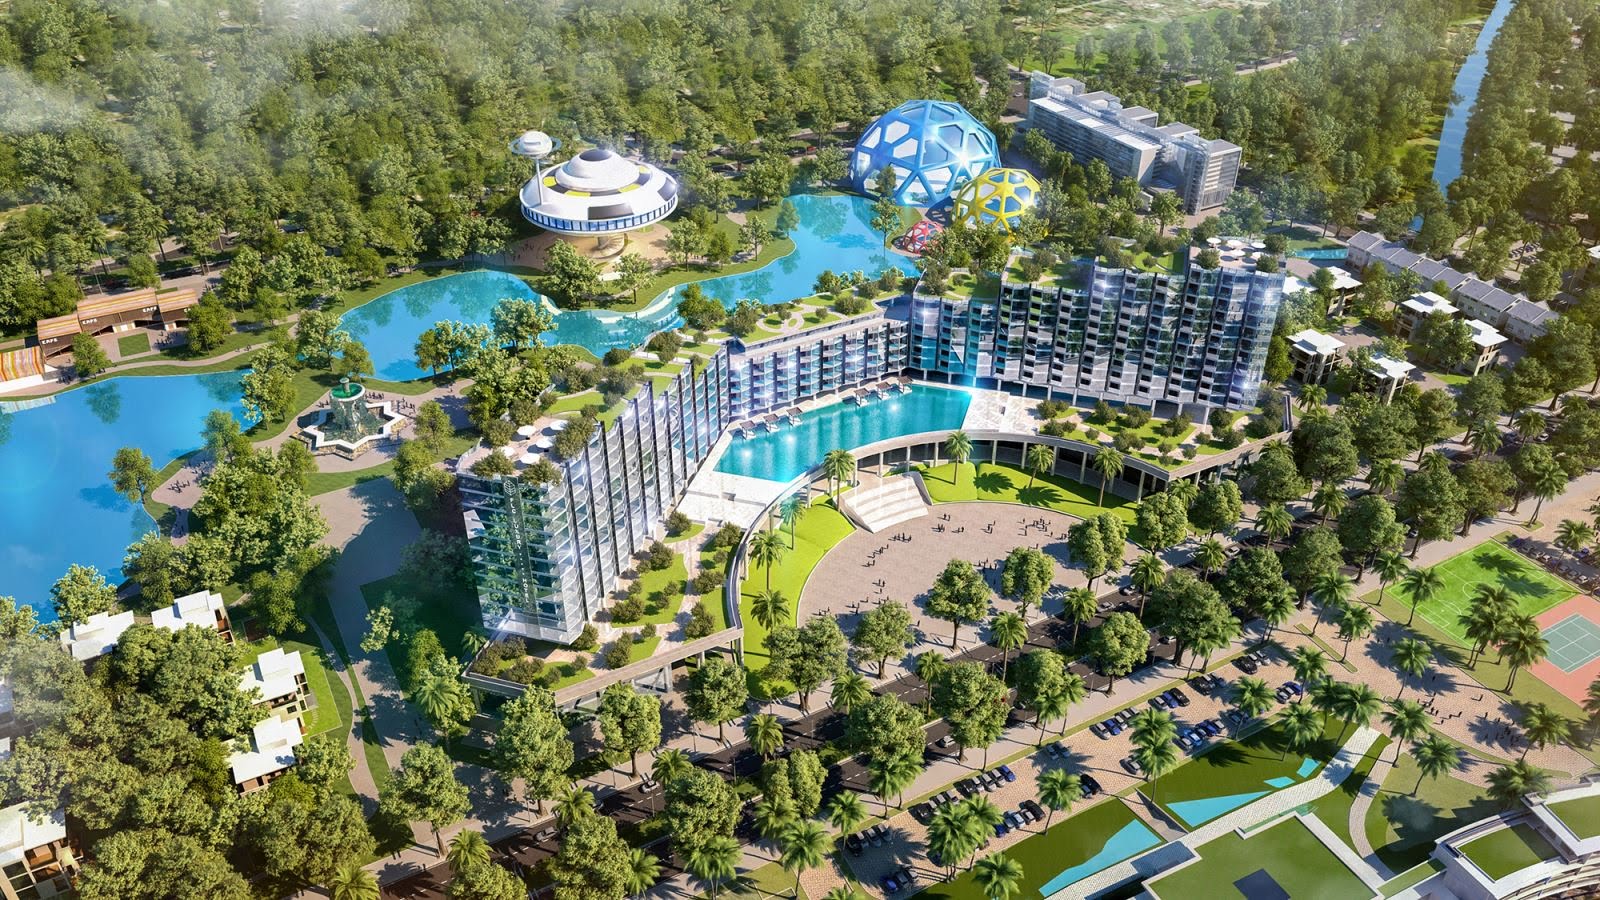 A resort project developed by FLC Group.